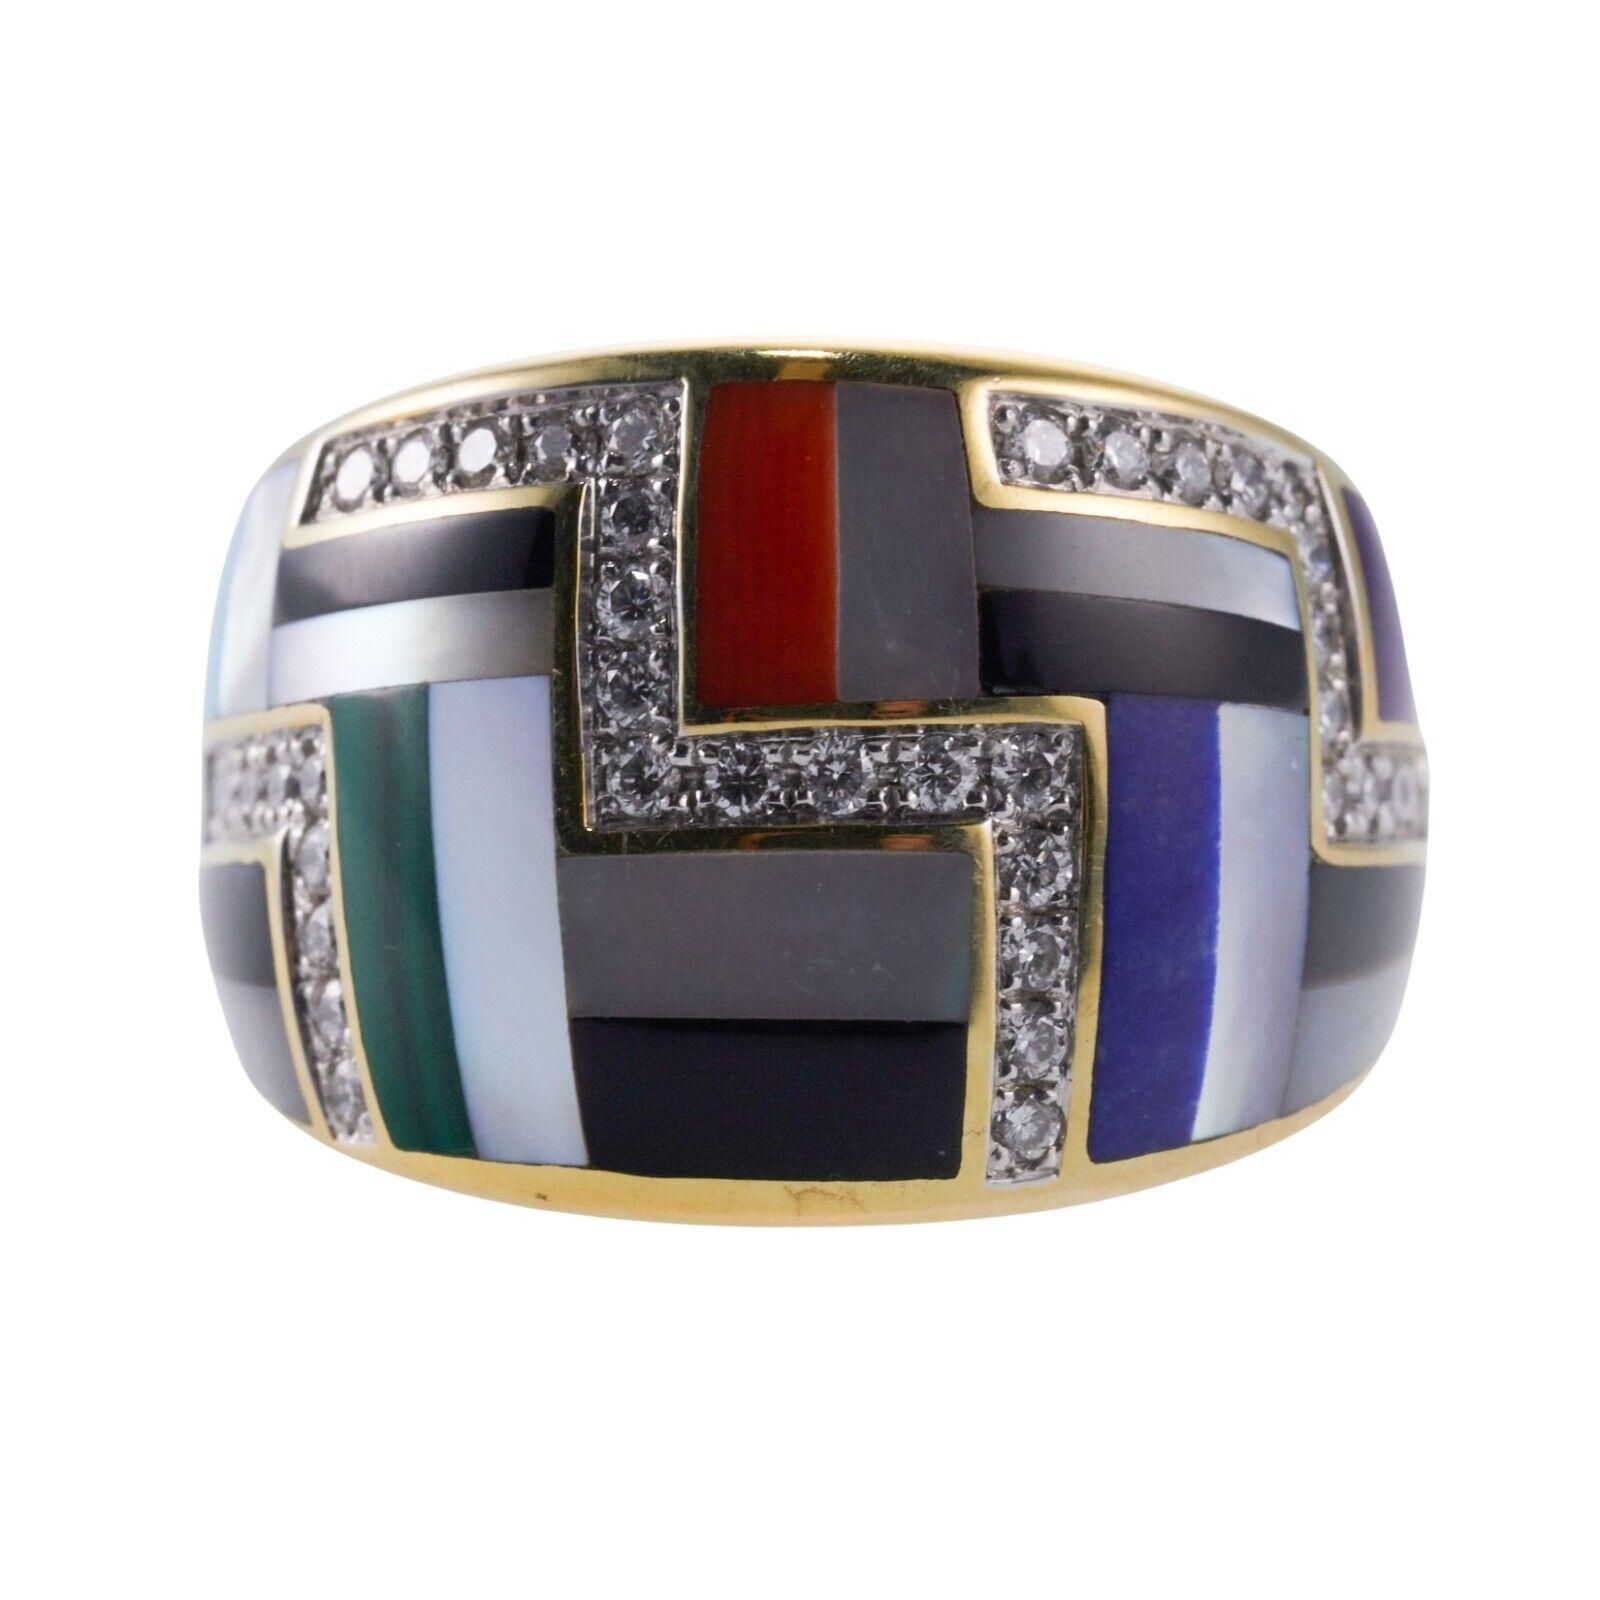 A 14k yellow gold ring set with mother-of-pearl, coral, onyx, malachite lapis, turquoise, purple sugilite and diamonds - approx. 0.42ctw. Ring Size 6.5, 16mm wide. Weight is 12 grams.